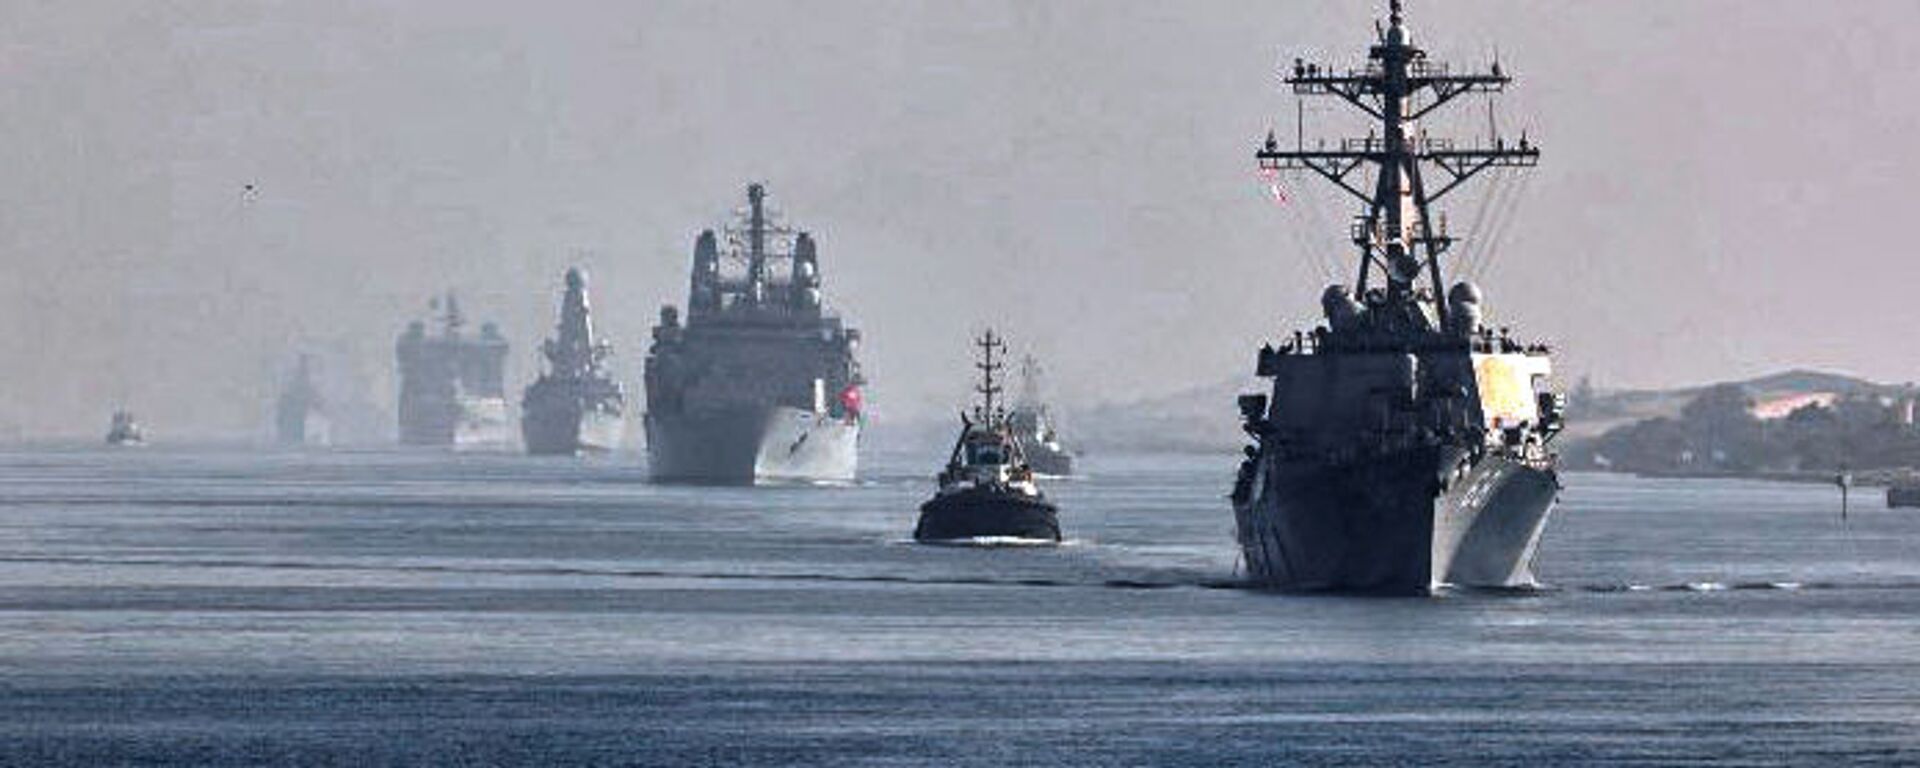 This handout image provided by the official Twitter account of Commodore Steve Moorhouse, Royal Navy, Commander of the UK Carrier Strike Group on July 6, 2021 shows a view of the vessels of the strike group sailing behind the Royal Navy's HMS Queen Elizabeth aircraft carrier through Egypt's Suez Canal. - Sputnik International, 1920, 30.07.2021